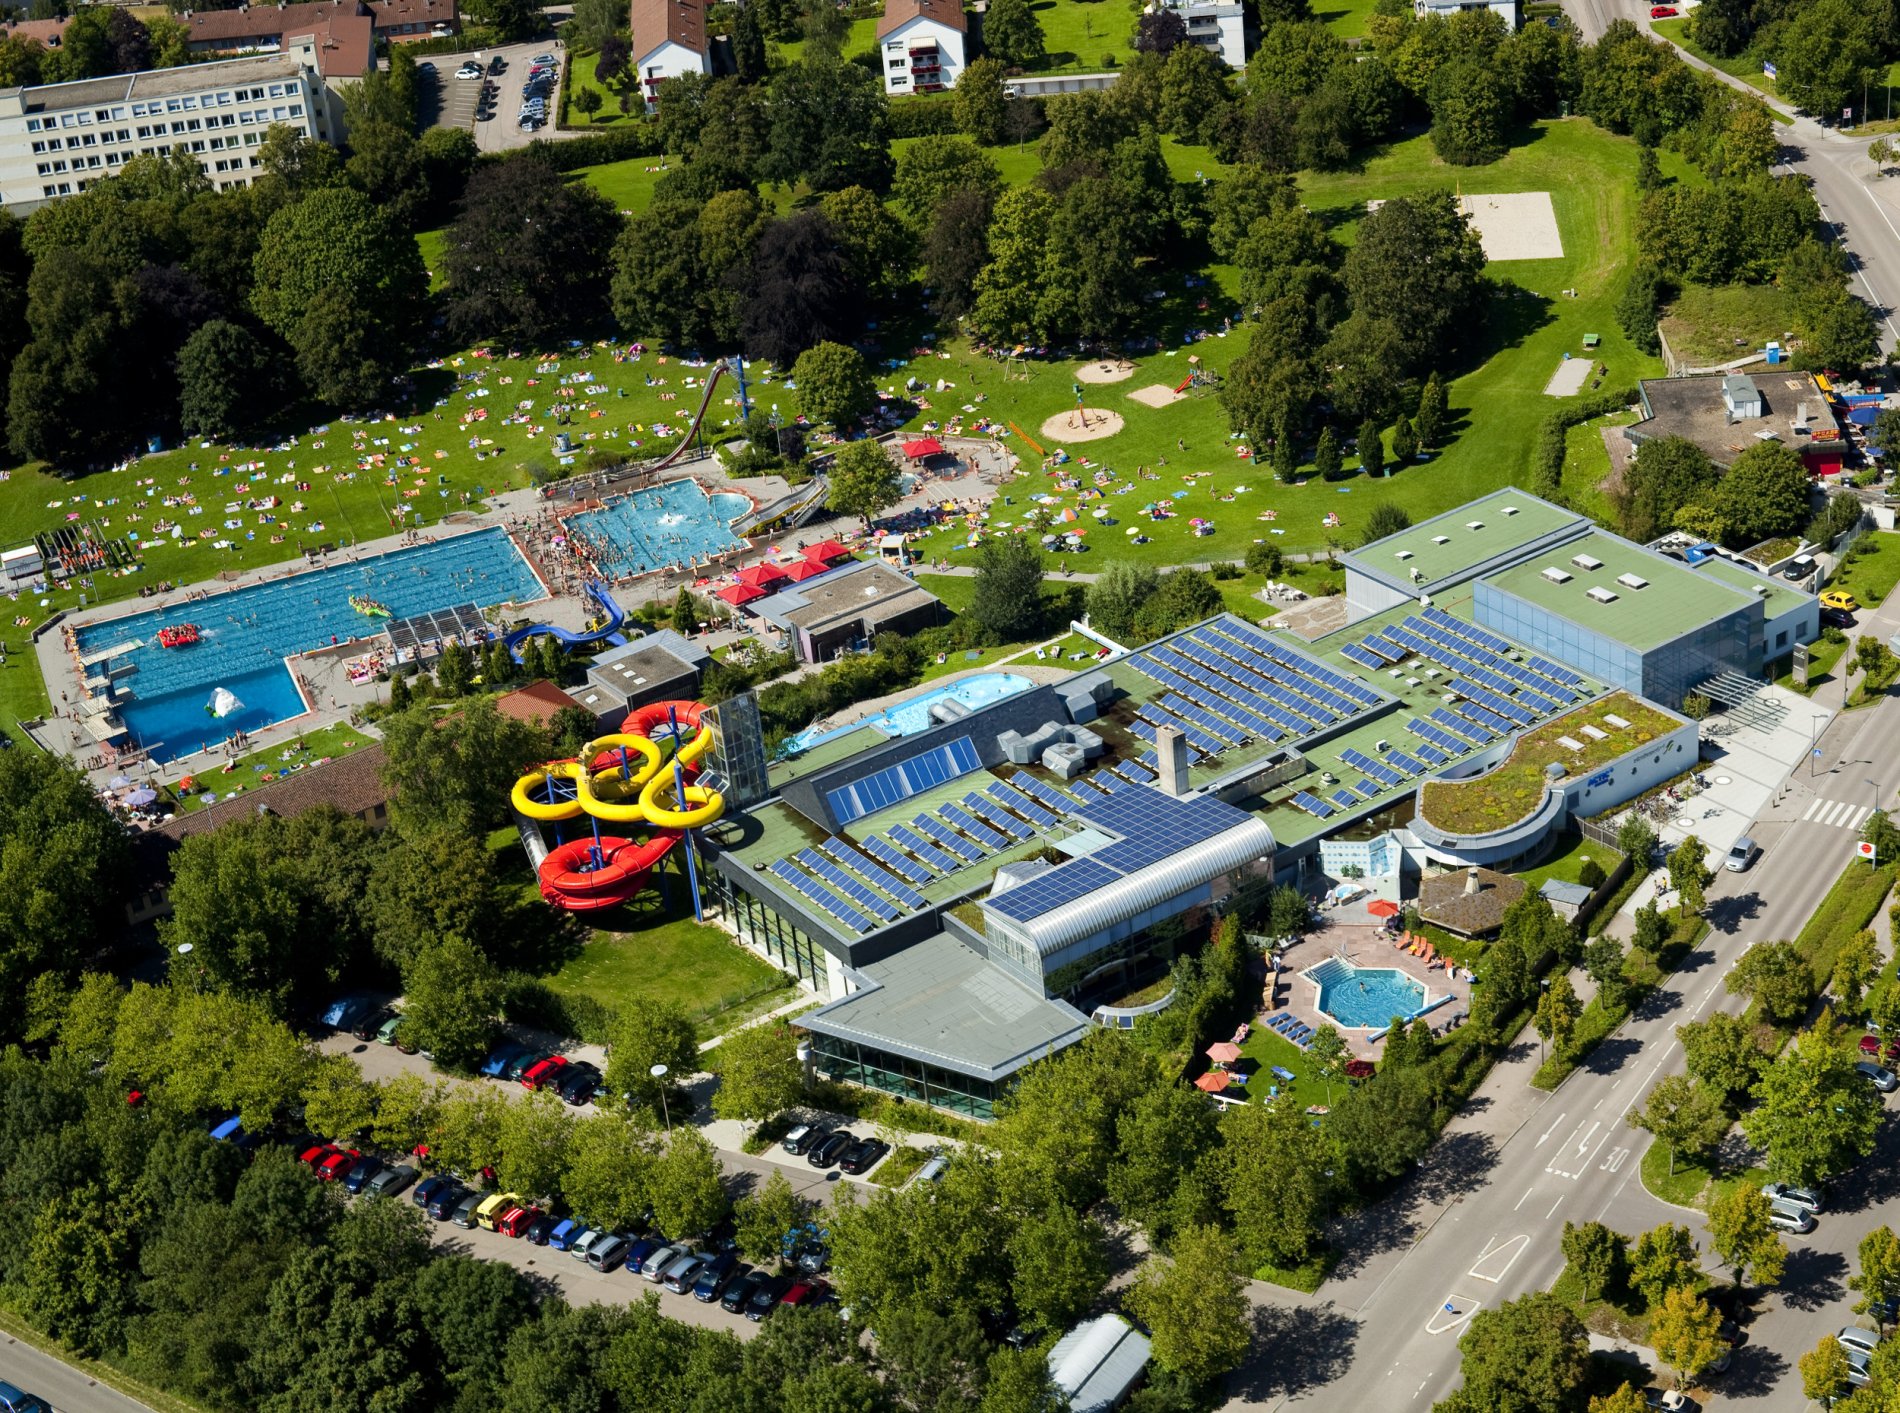 View on the Schenkensee Swimming Pool from above